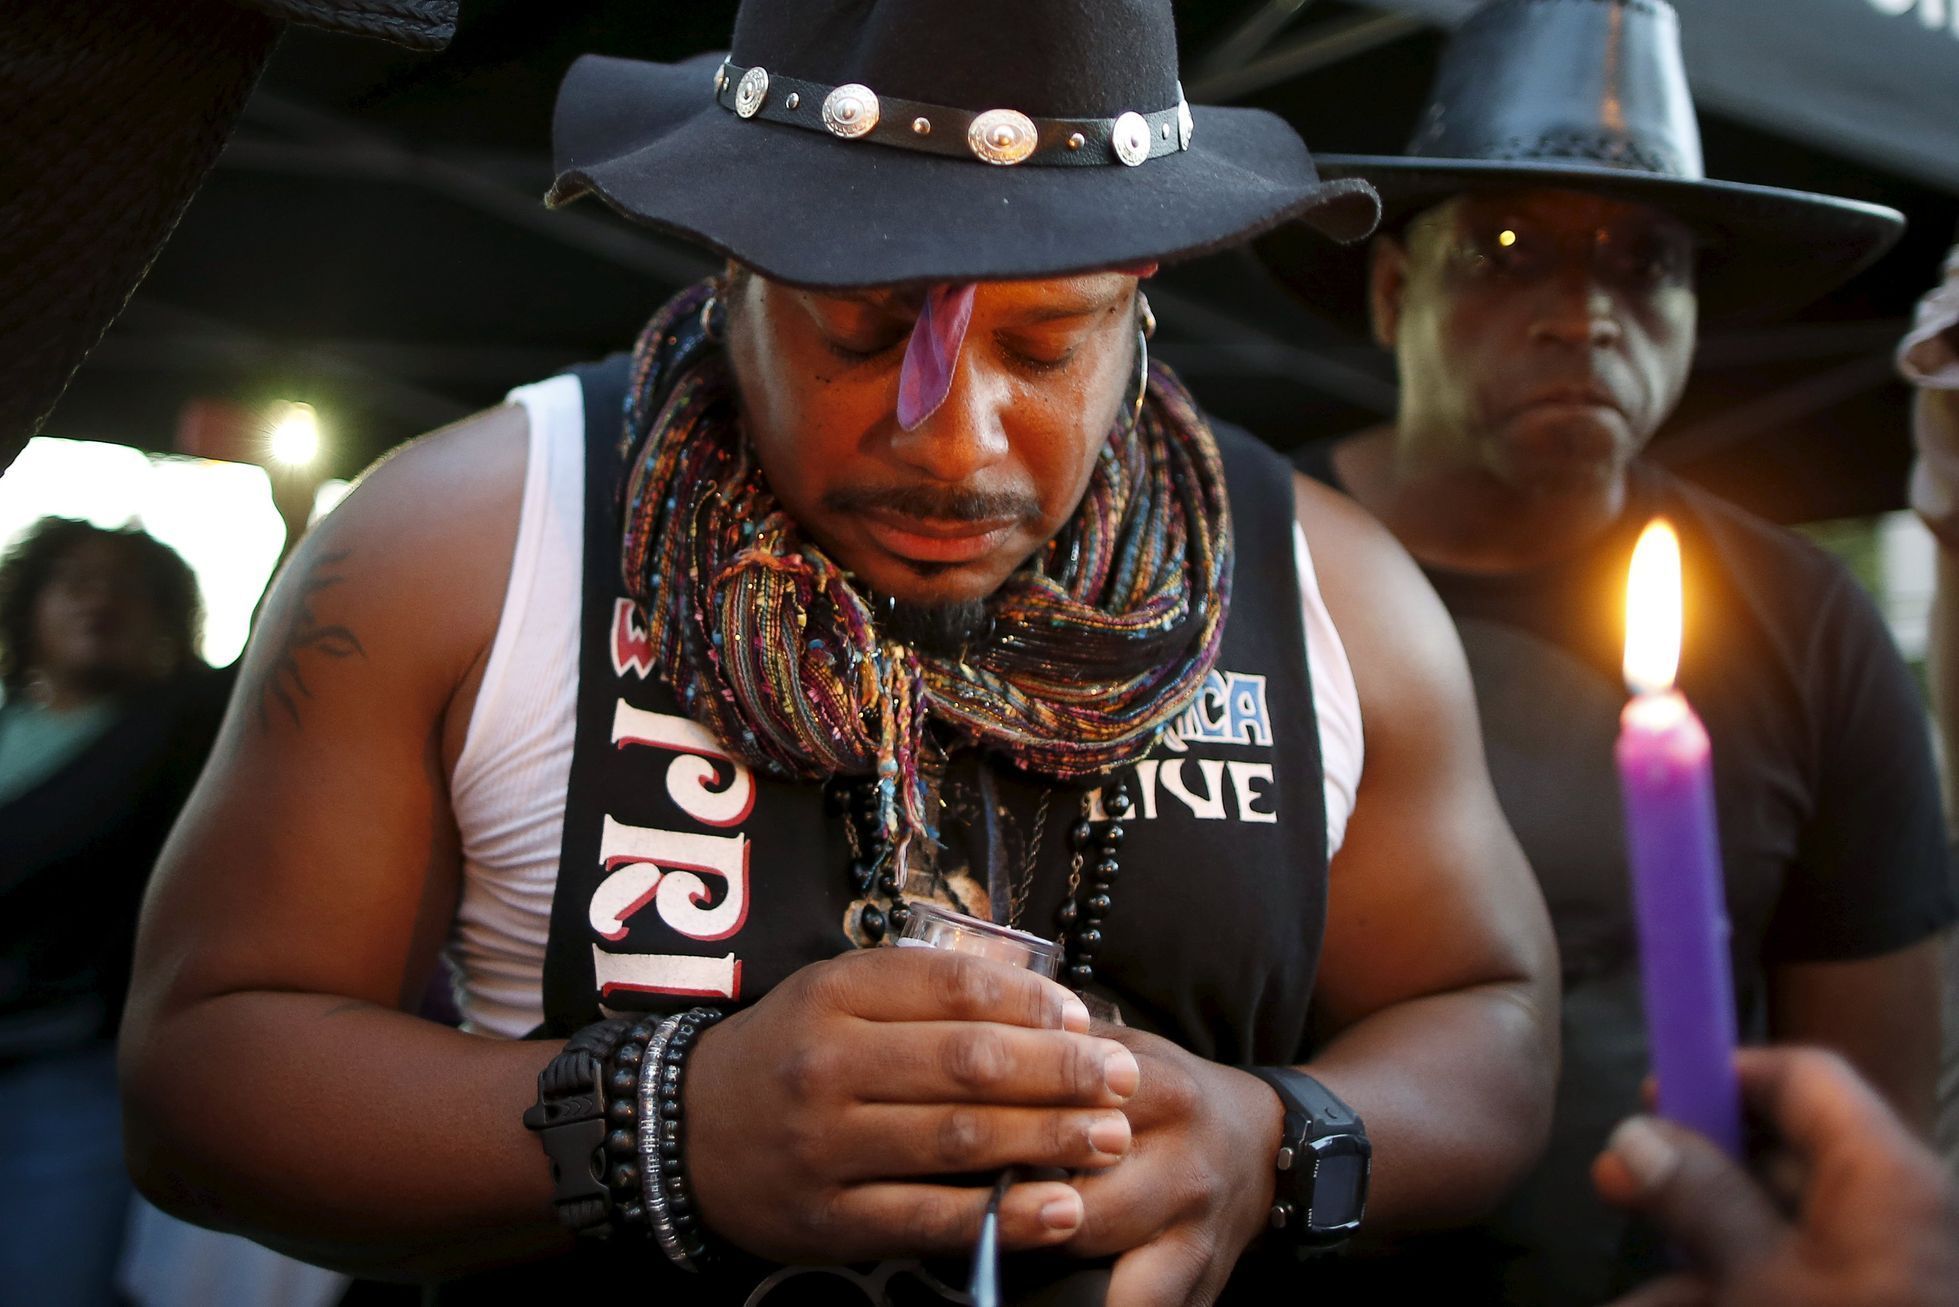 Kenneth Beavers, 49, holds a candle at a vigil to celebrate the life and music of deceased musician Prince in Los Angeles